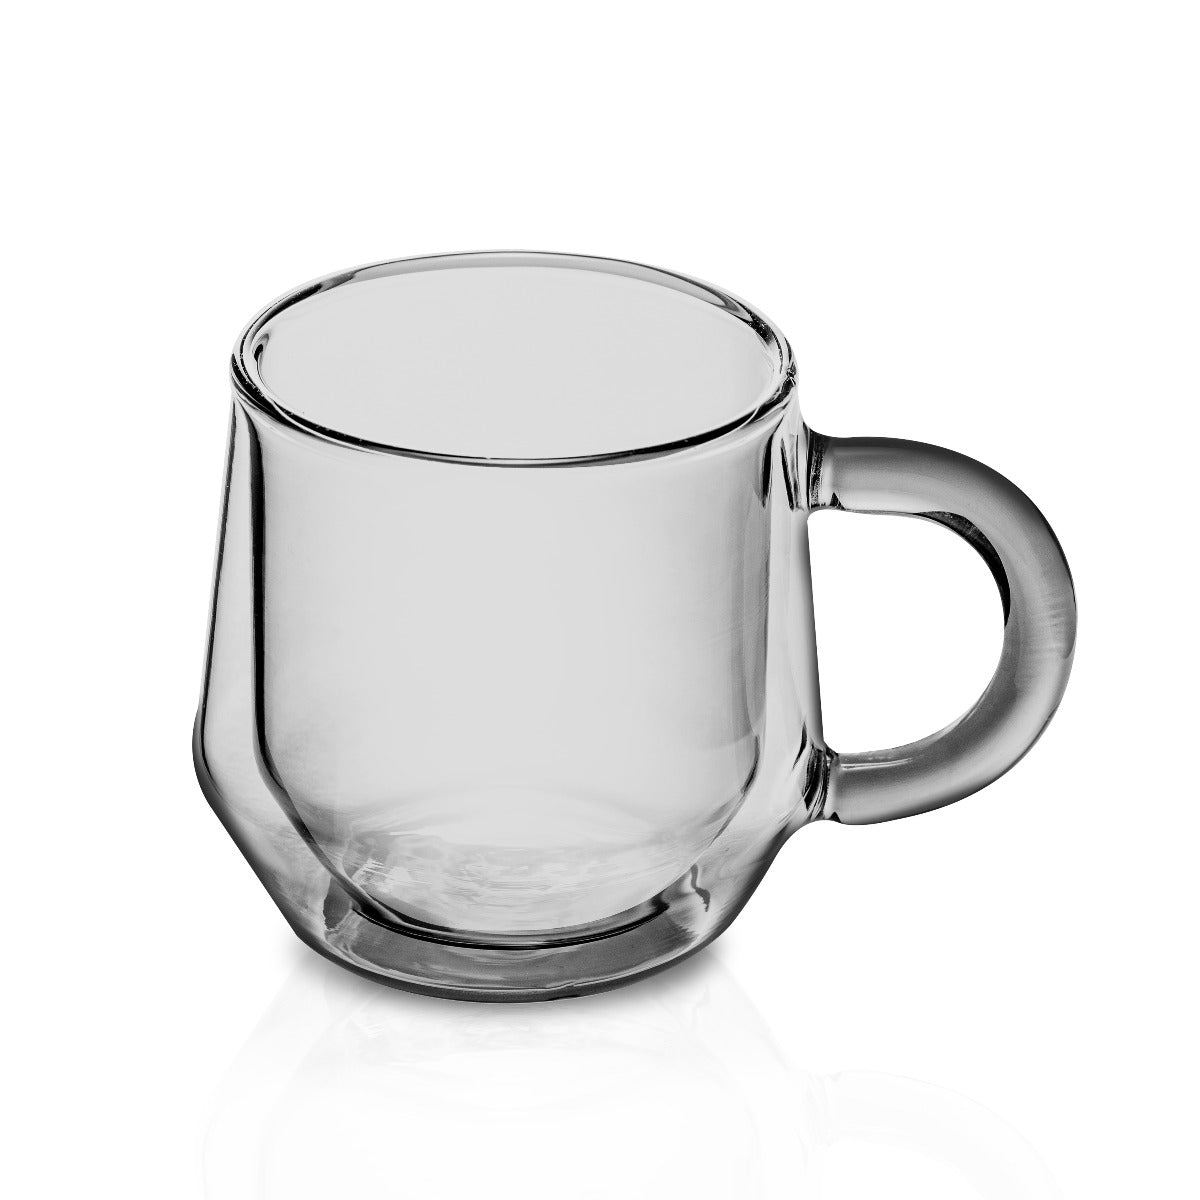 Double Walled Glass Coffee Drink Mug with Handle - Set of 2, Clear